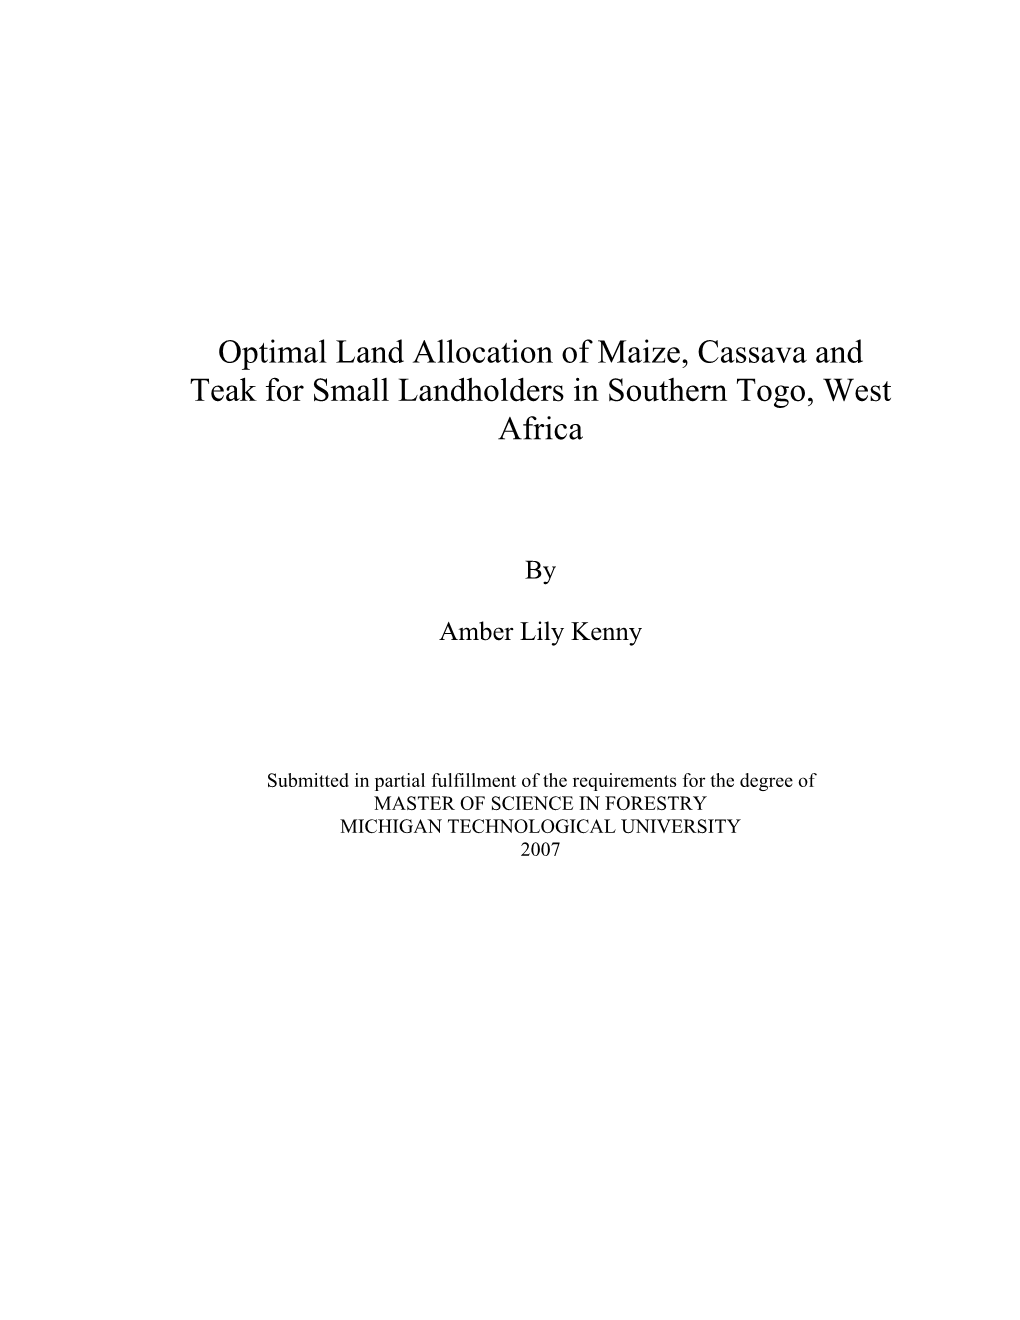 Optimal Land Allocation of Maize, Cassava and Teak for Small Landholders in Southern Togo, West Africa